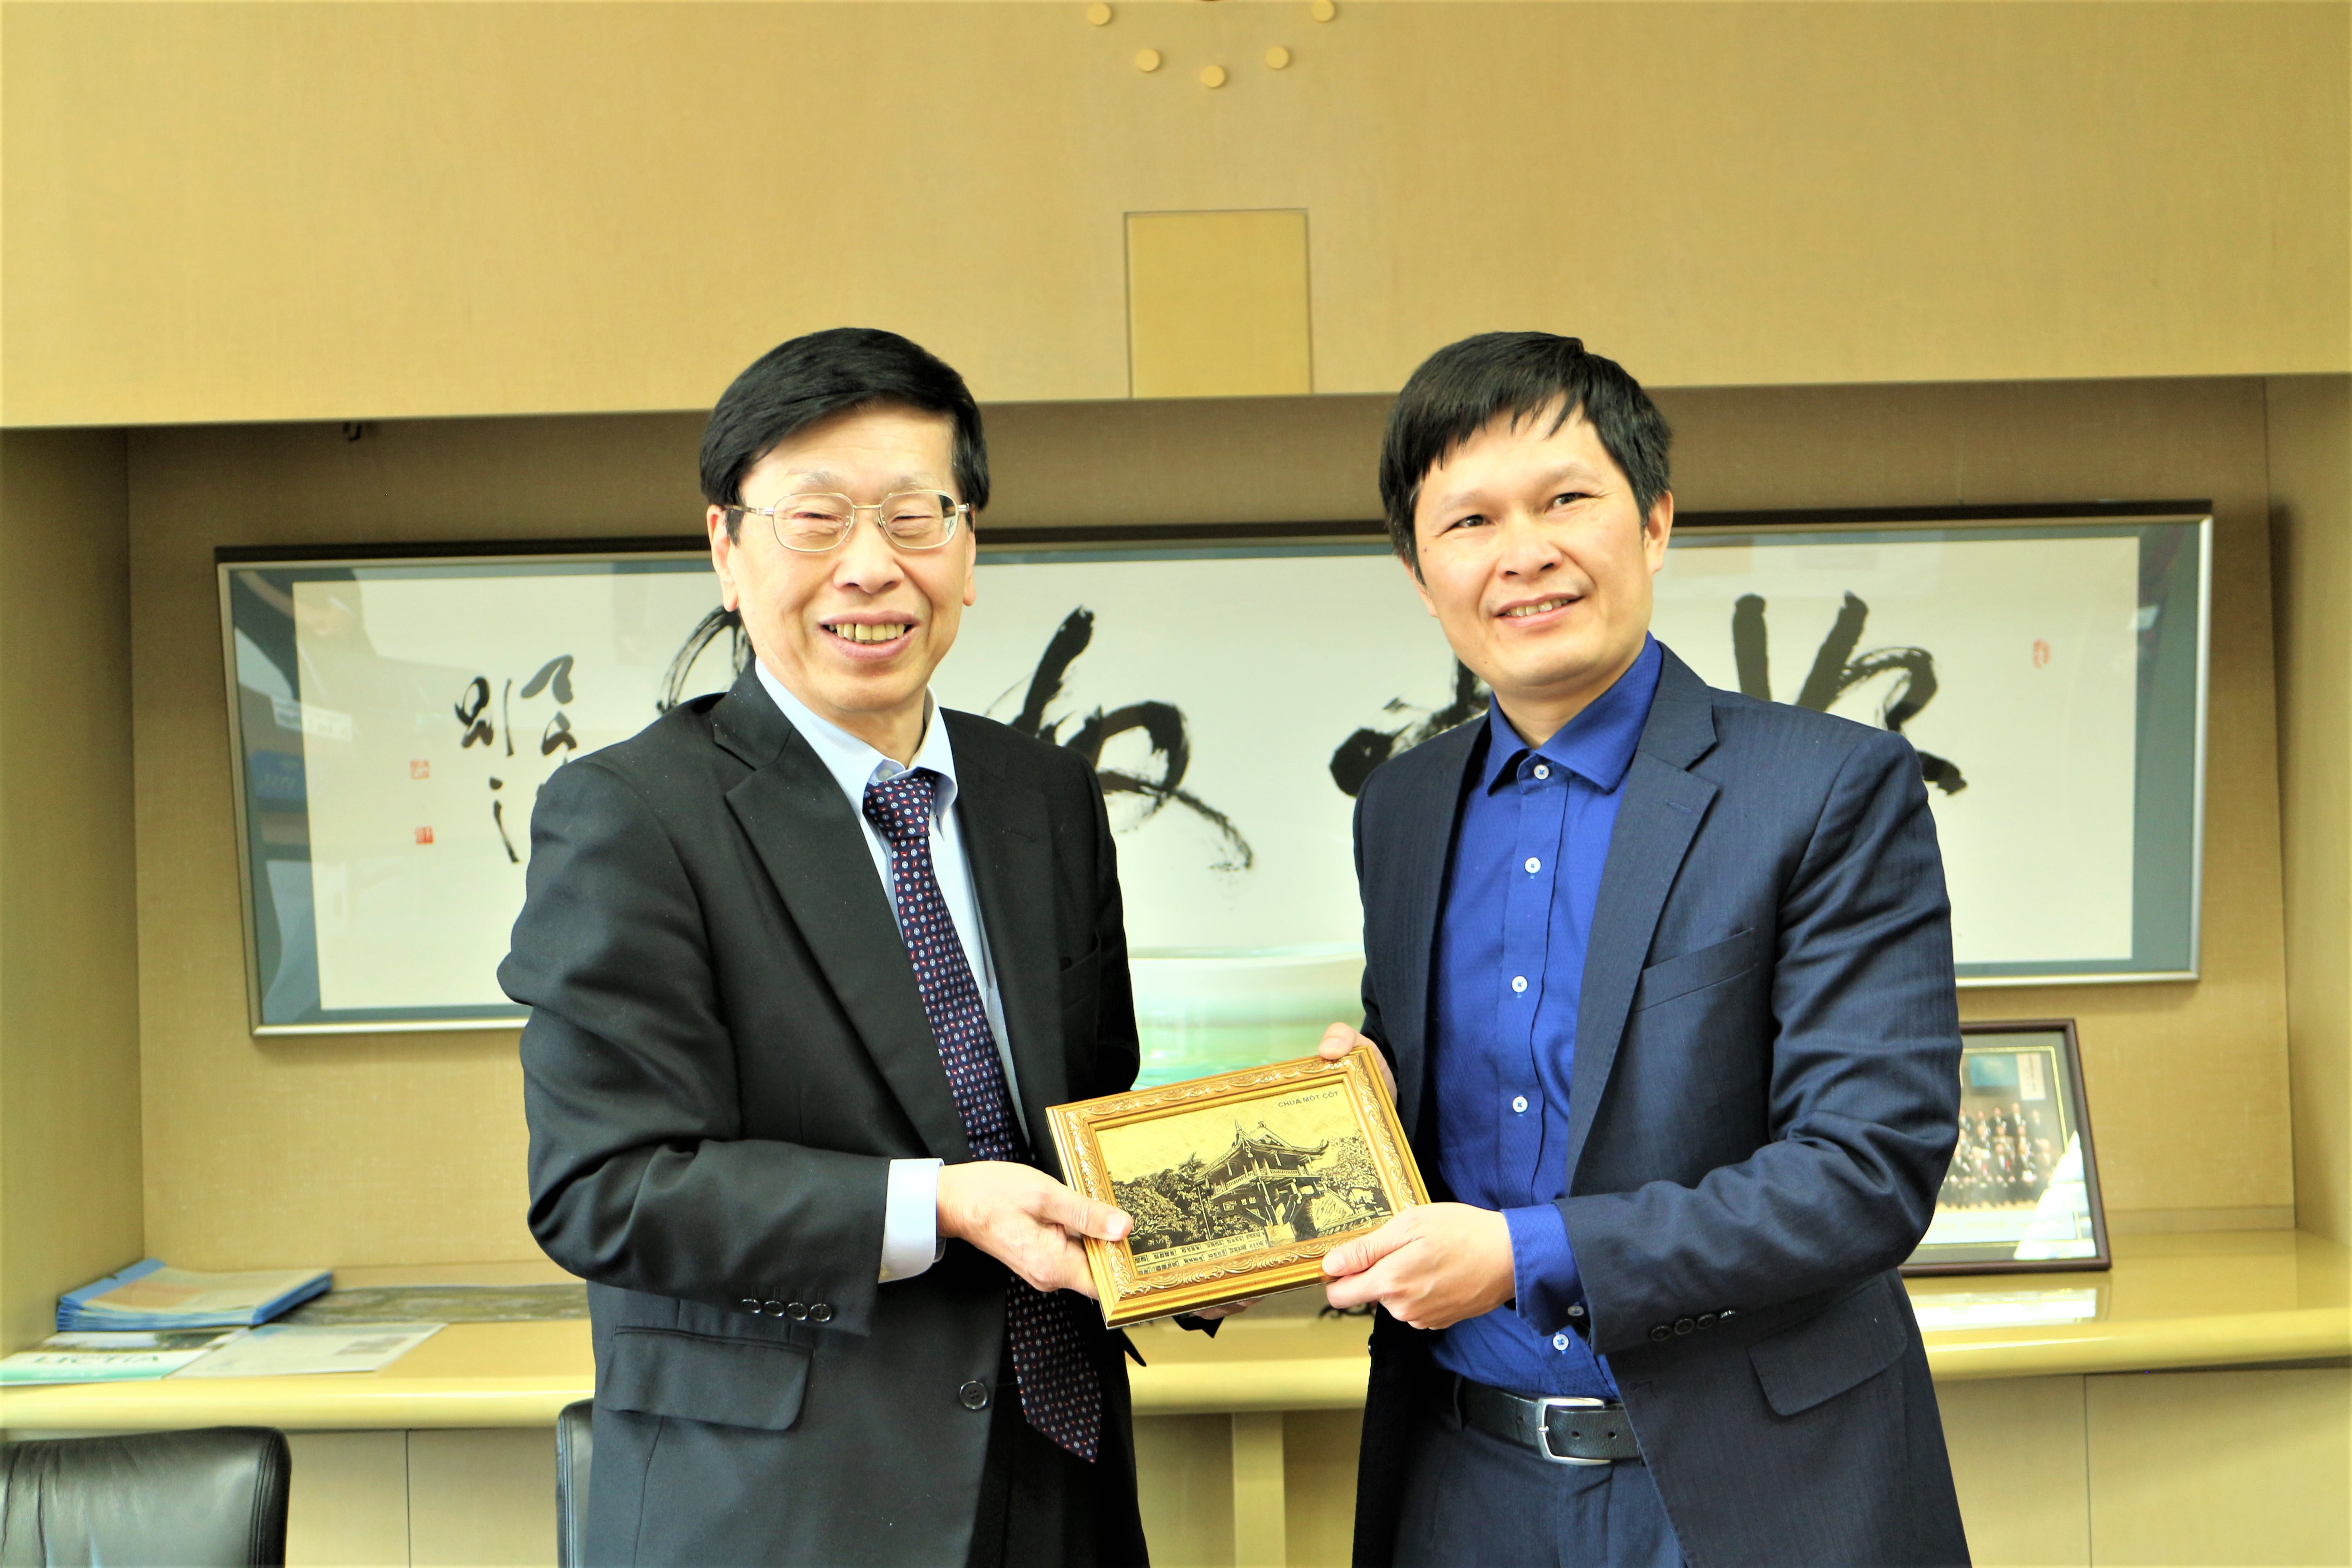 Delegation from Vietnam National University of Engineering and Technology (VNU-UET) visited UoA